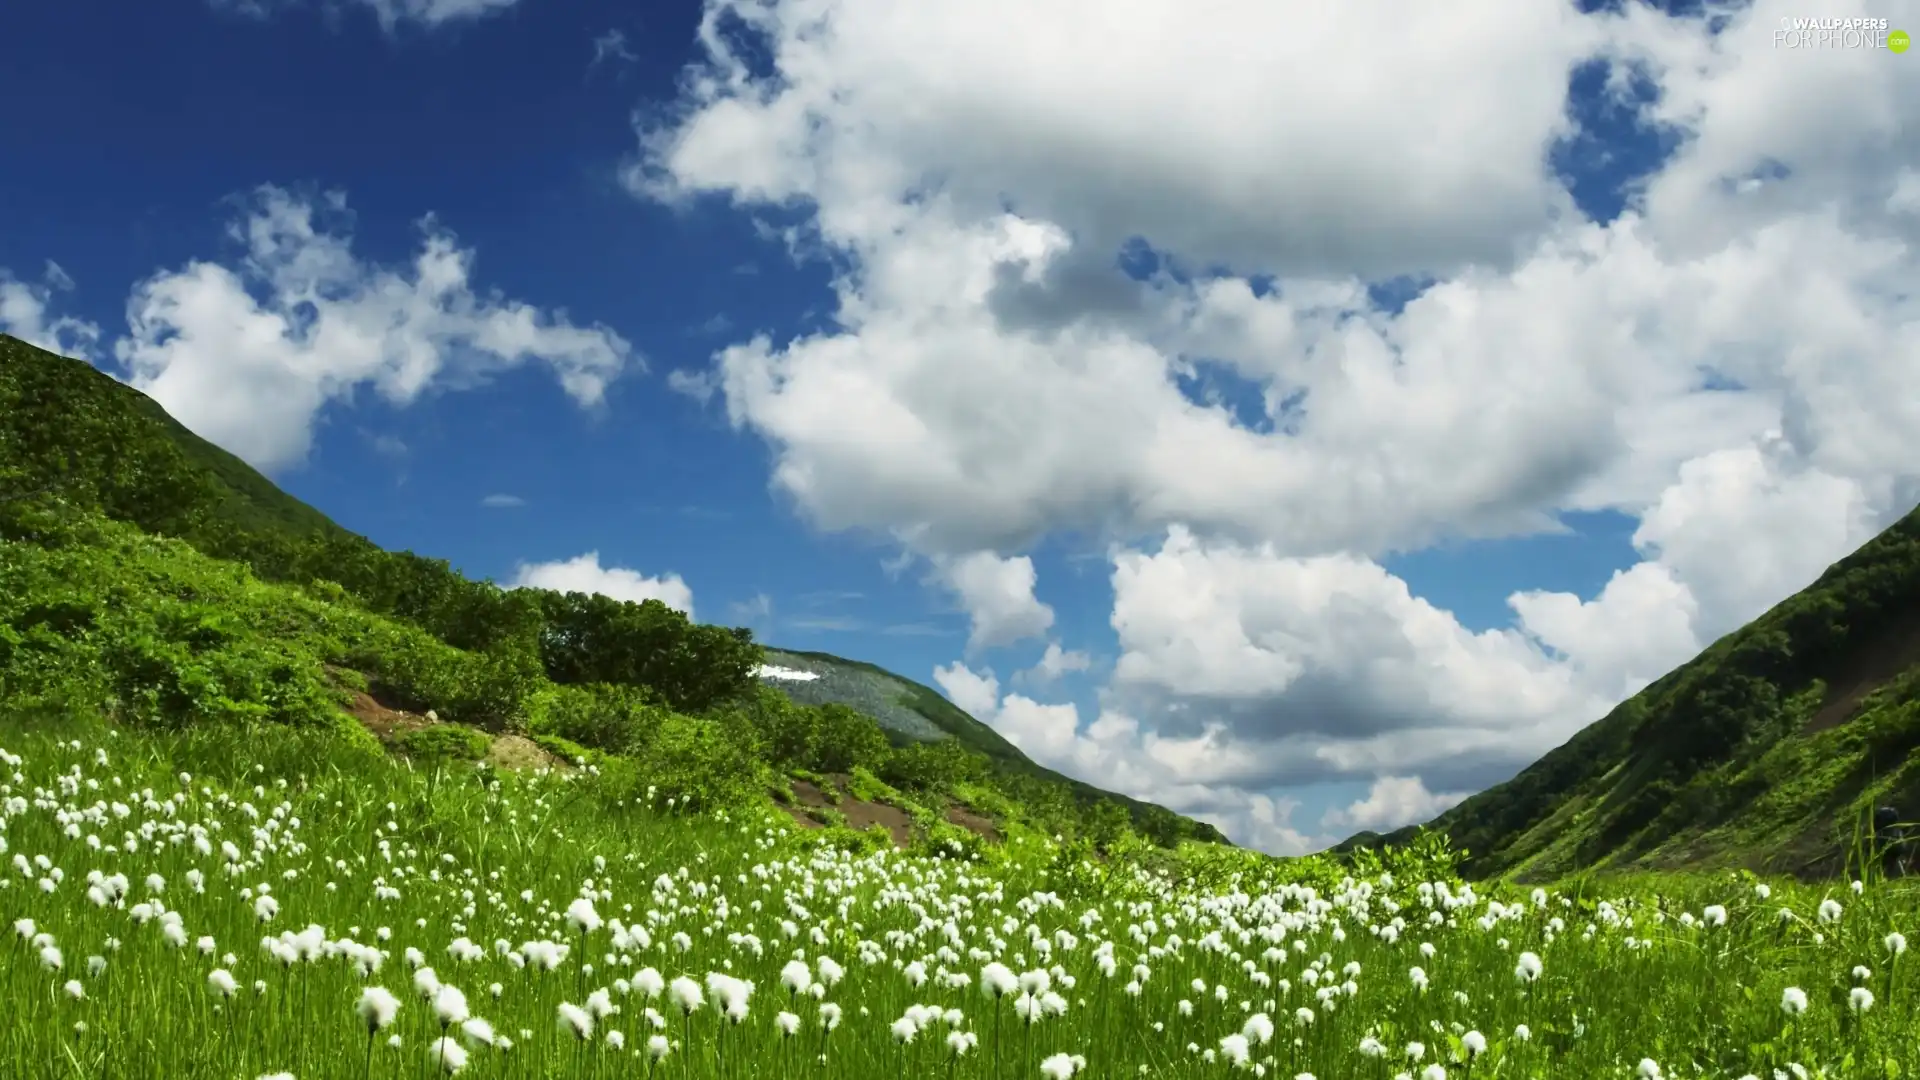 The Hills, grass, clouds, Meadow, Sky